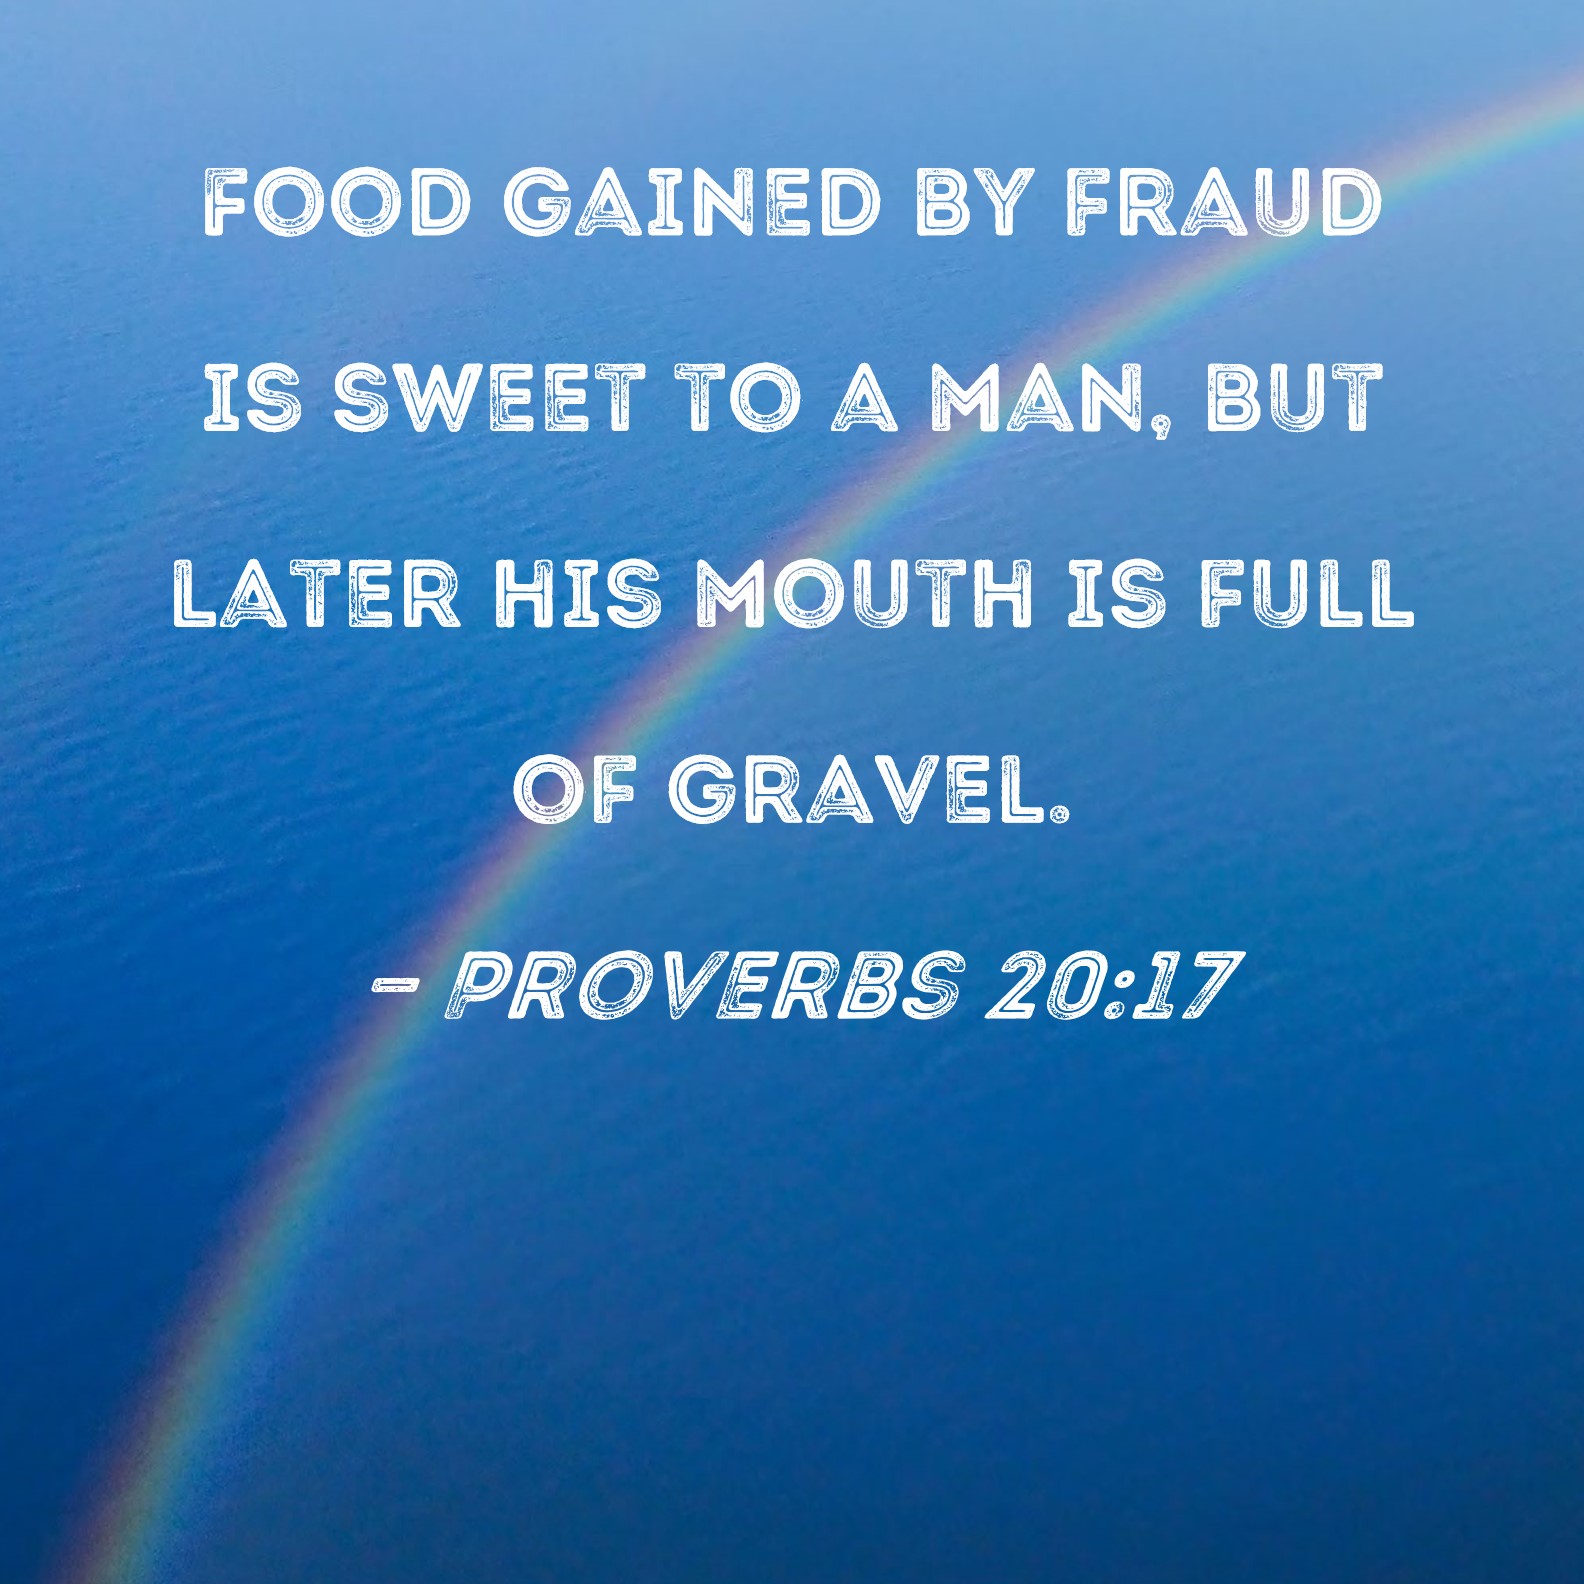 Proverbs 2017 Food Gained By Fraud Is Sweet To A Man But Later His